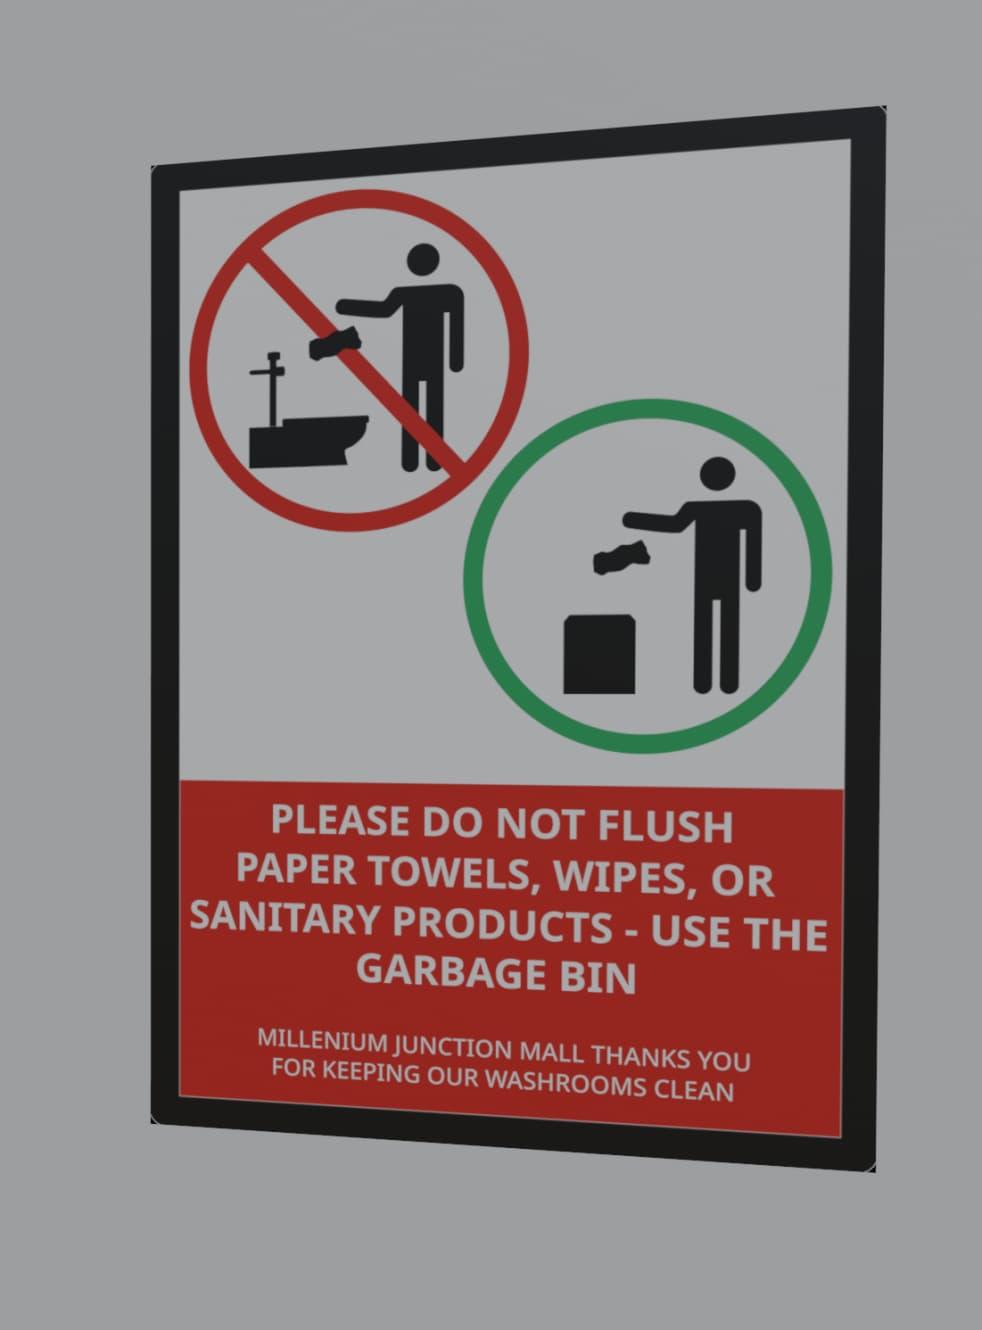 A poster saying please do not flush paper towels, wipes, or sanitary products - use the garbage bin